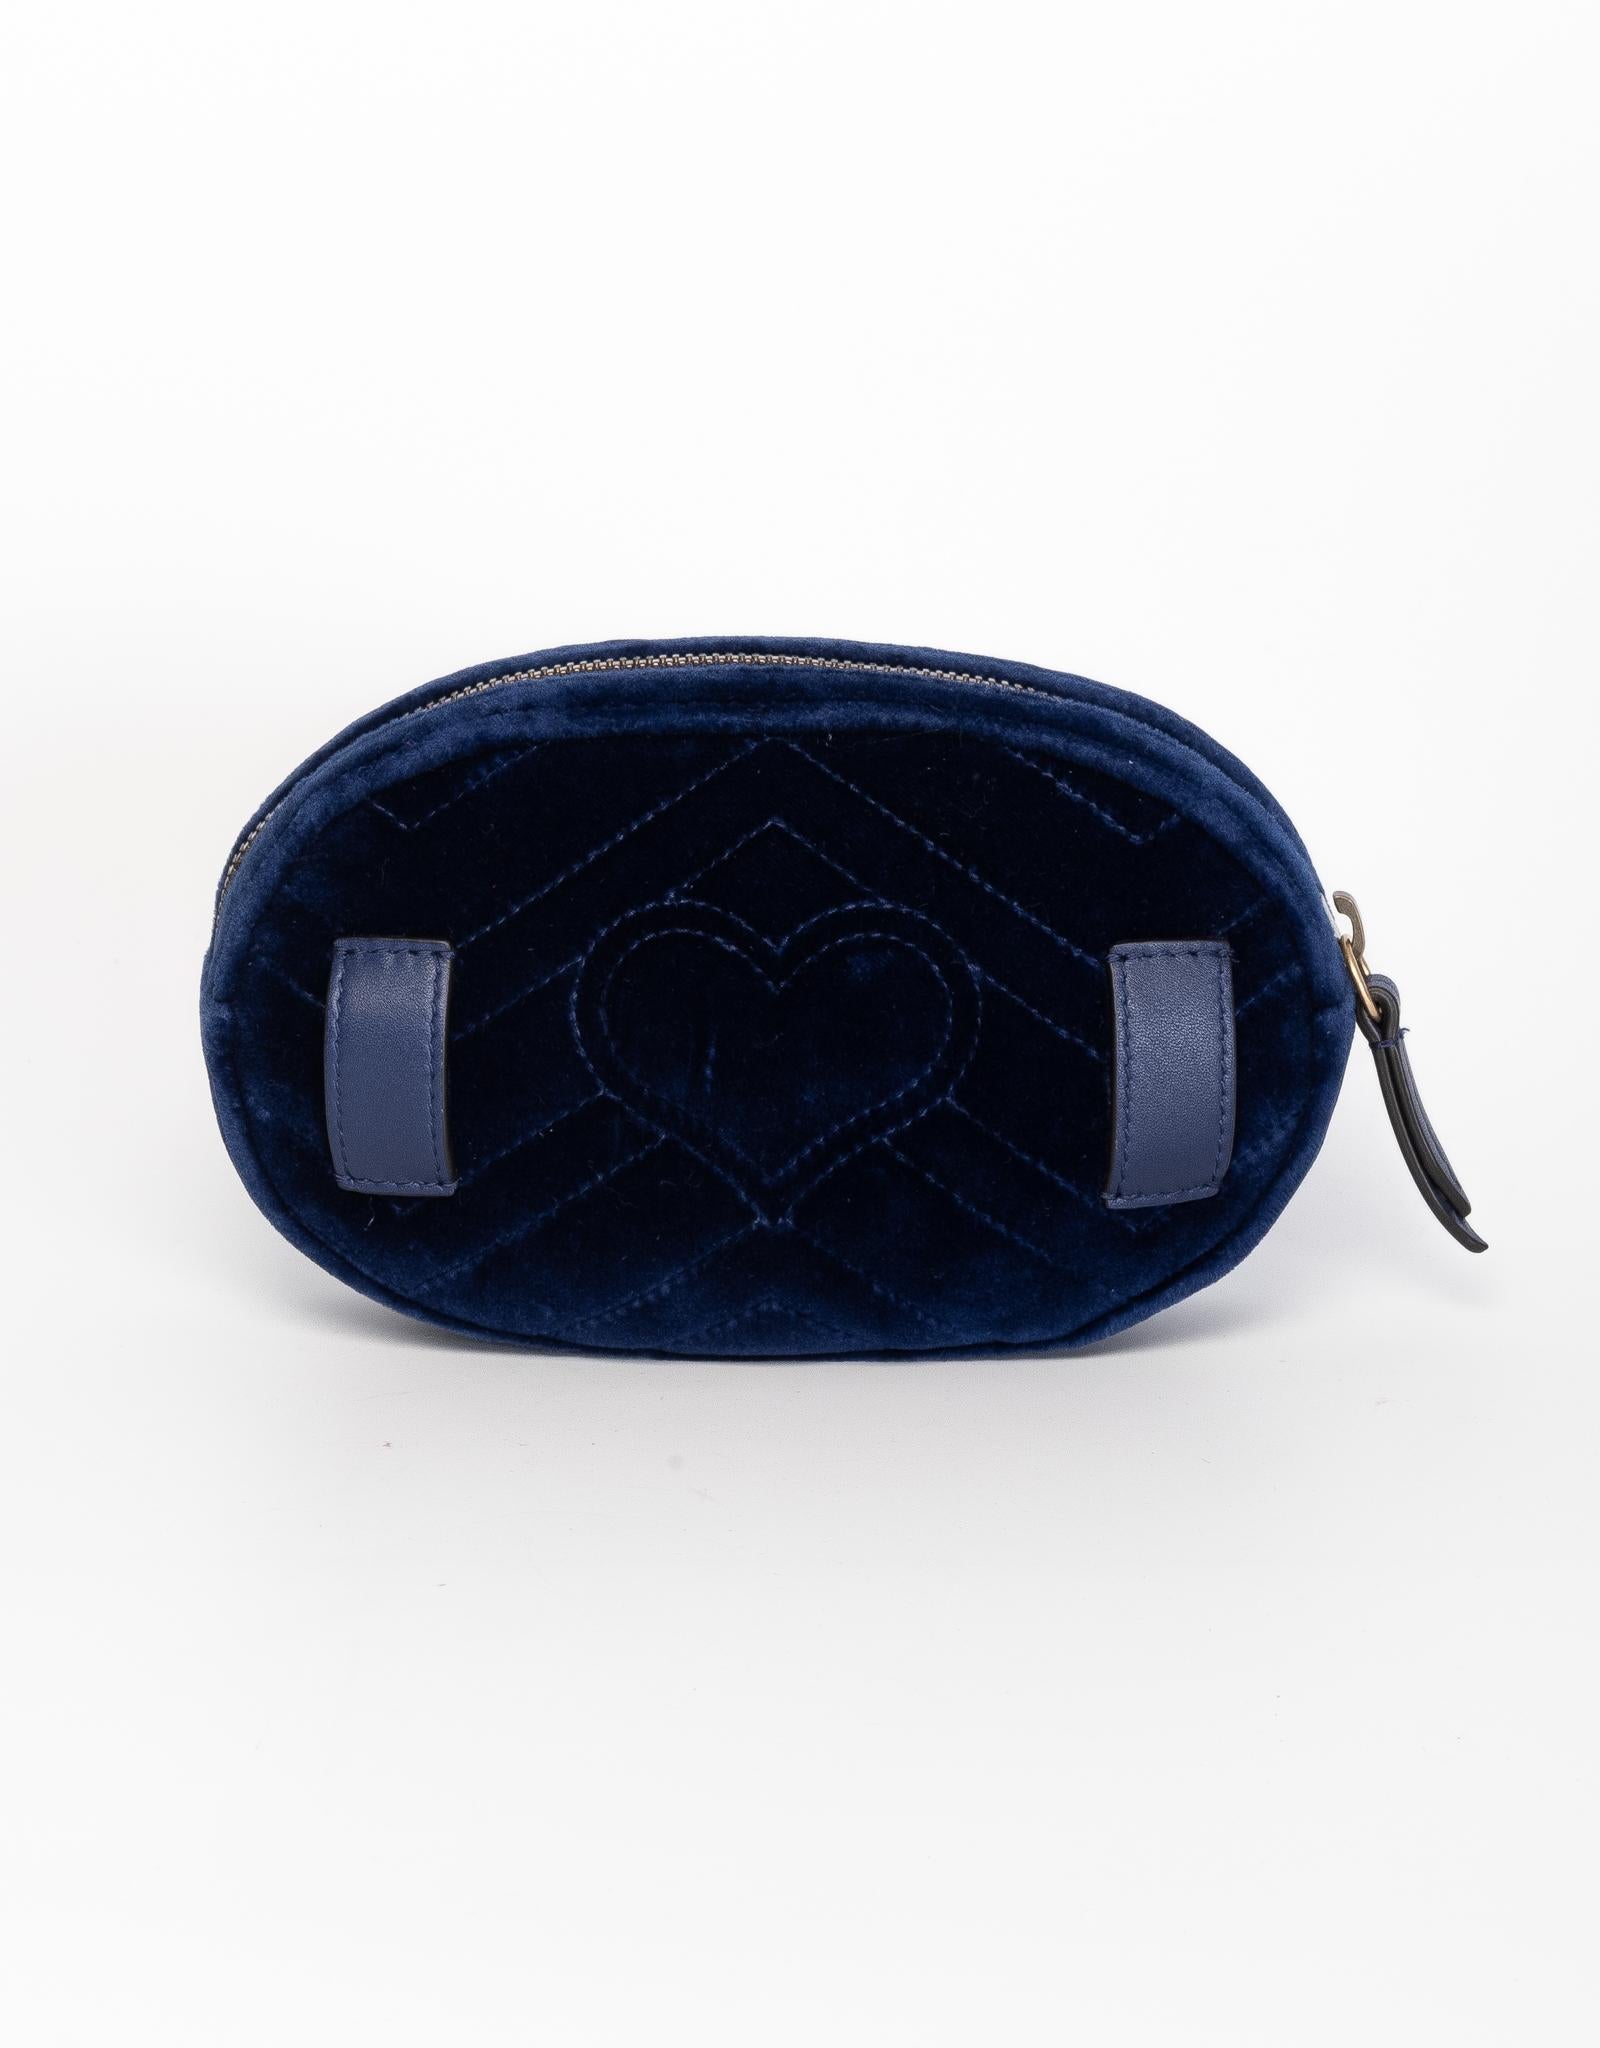 The GG Marmont belt bag is made of in velvet with a stitched chevron pattern and features a rounded shape with a retro sportswear 90s influence. Finished with the Double G detail, blue leather belt and antique gold-toned hardware. The leather belt